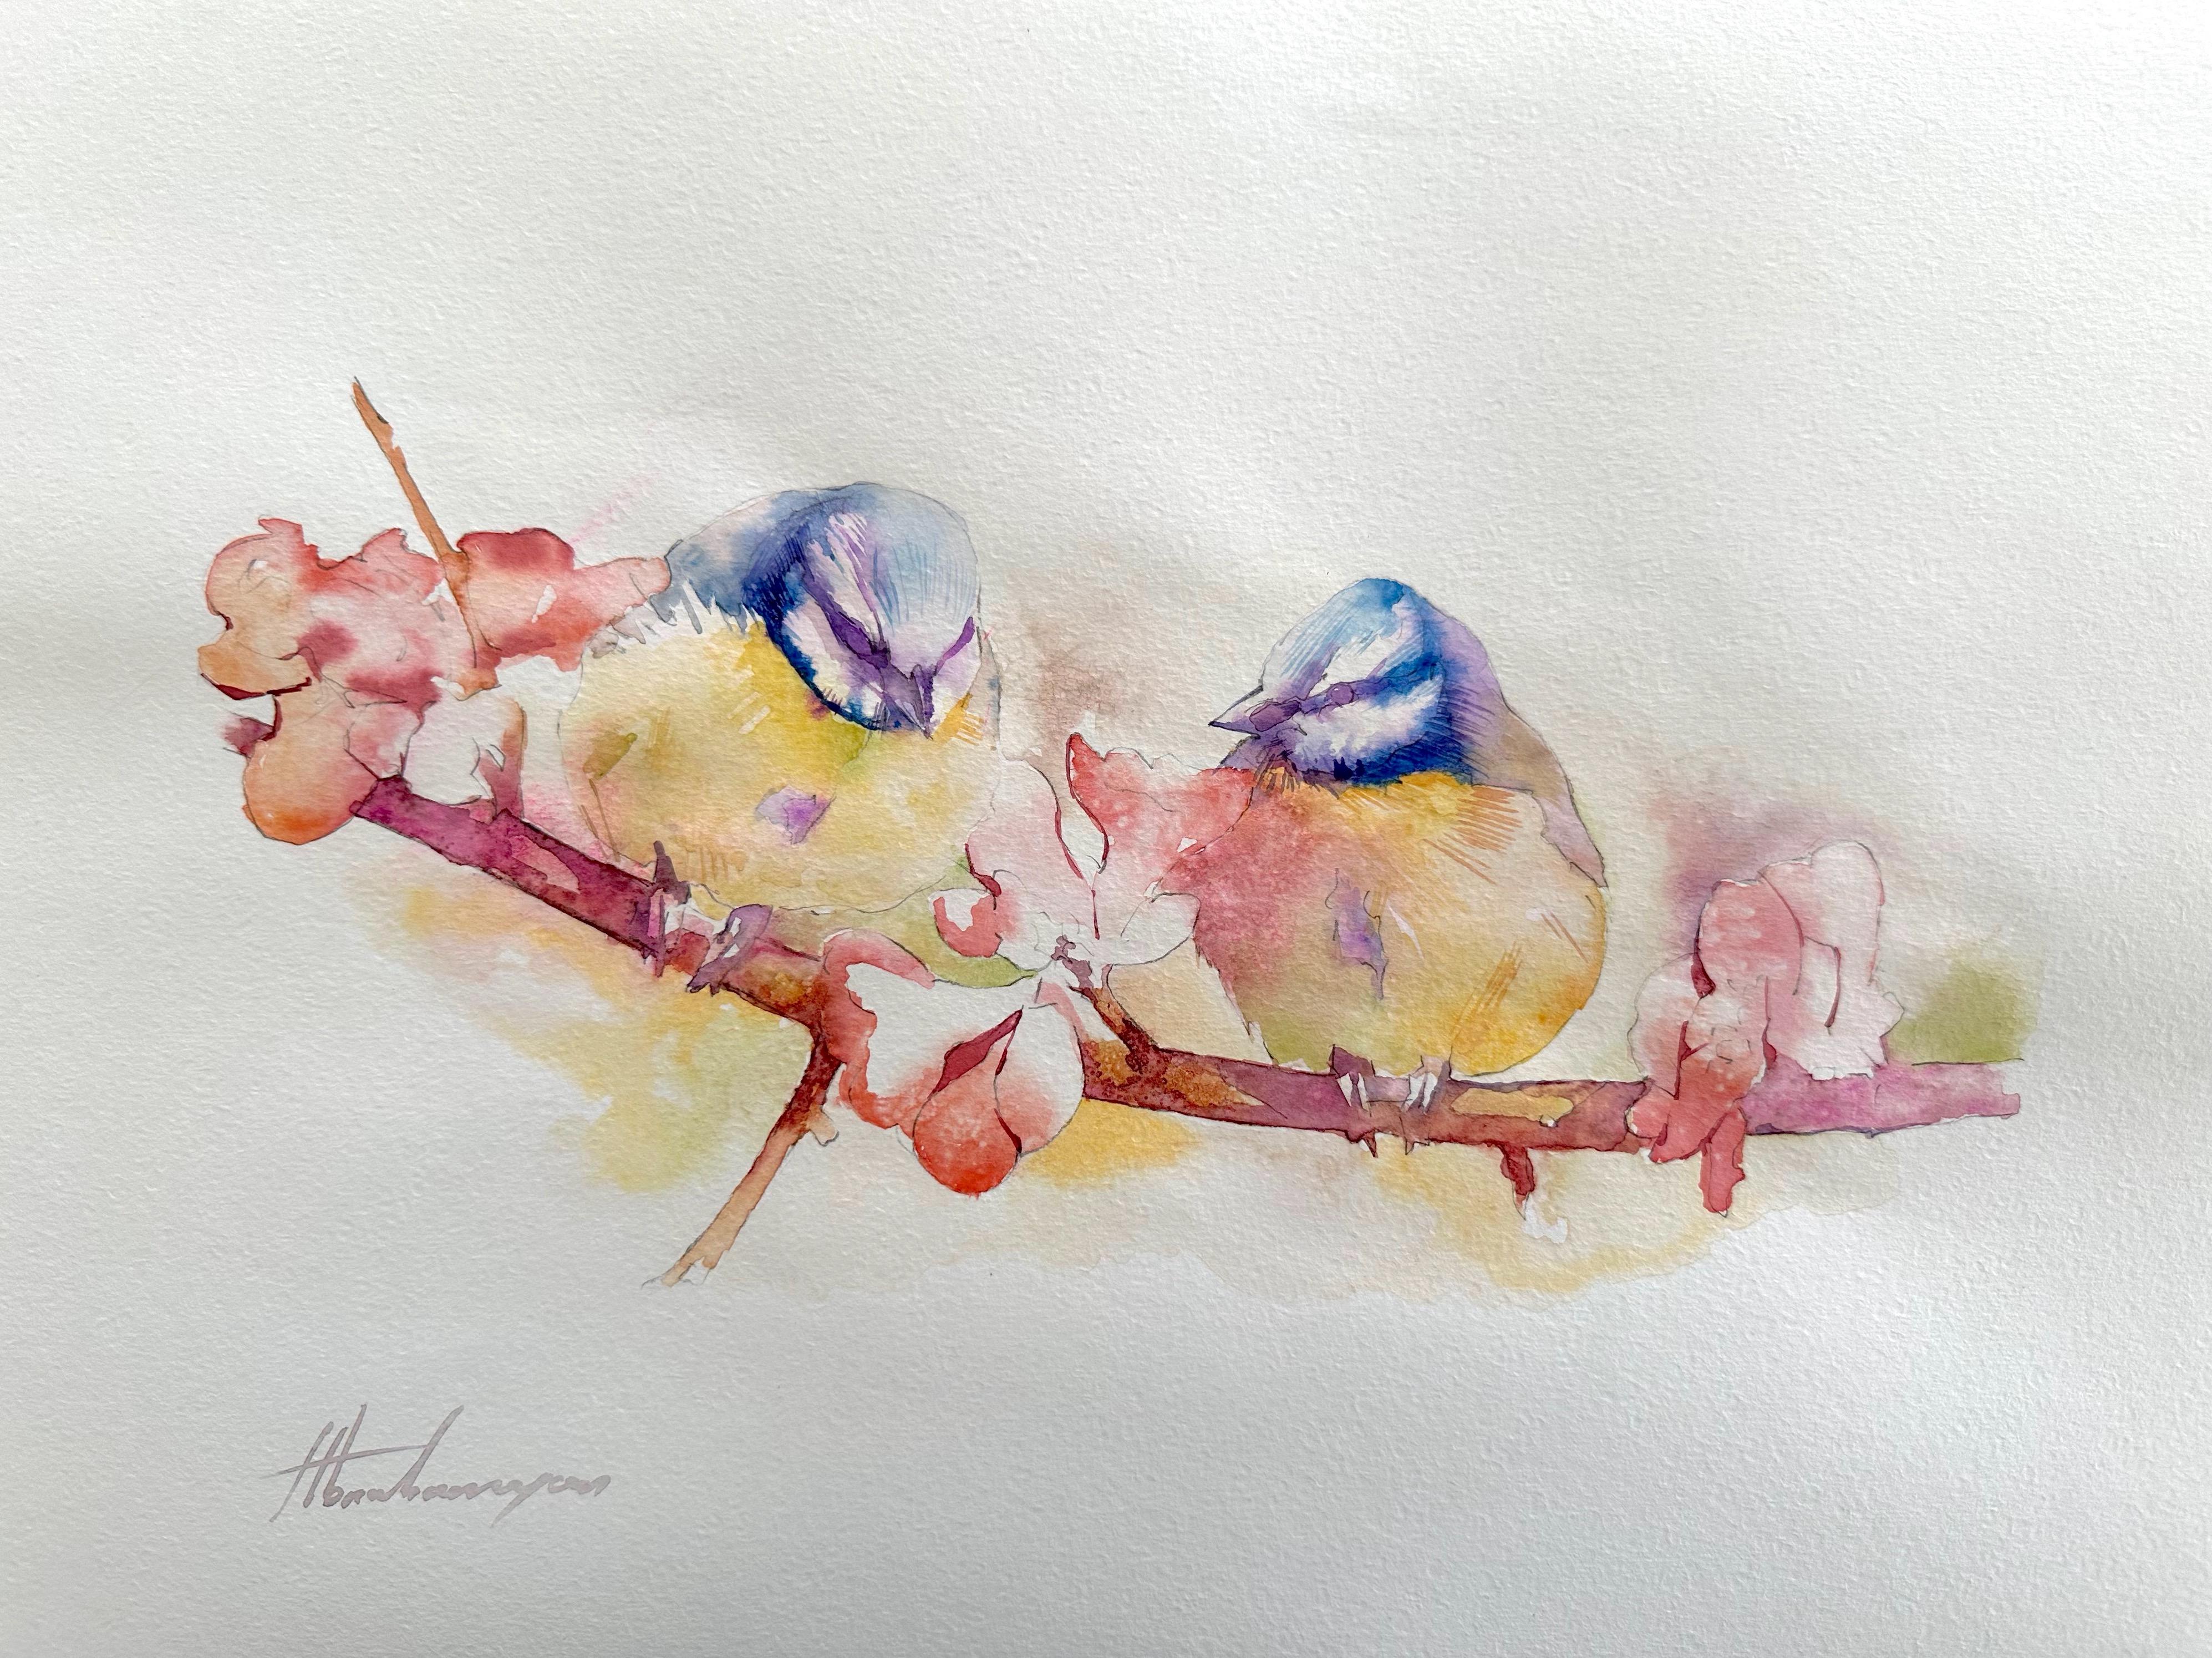 Artyom Abrahamyan Animal Art - Great Tits, Bird, Watercolor Handmade Painting, One of a Kind